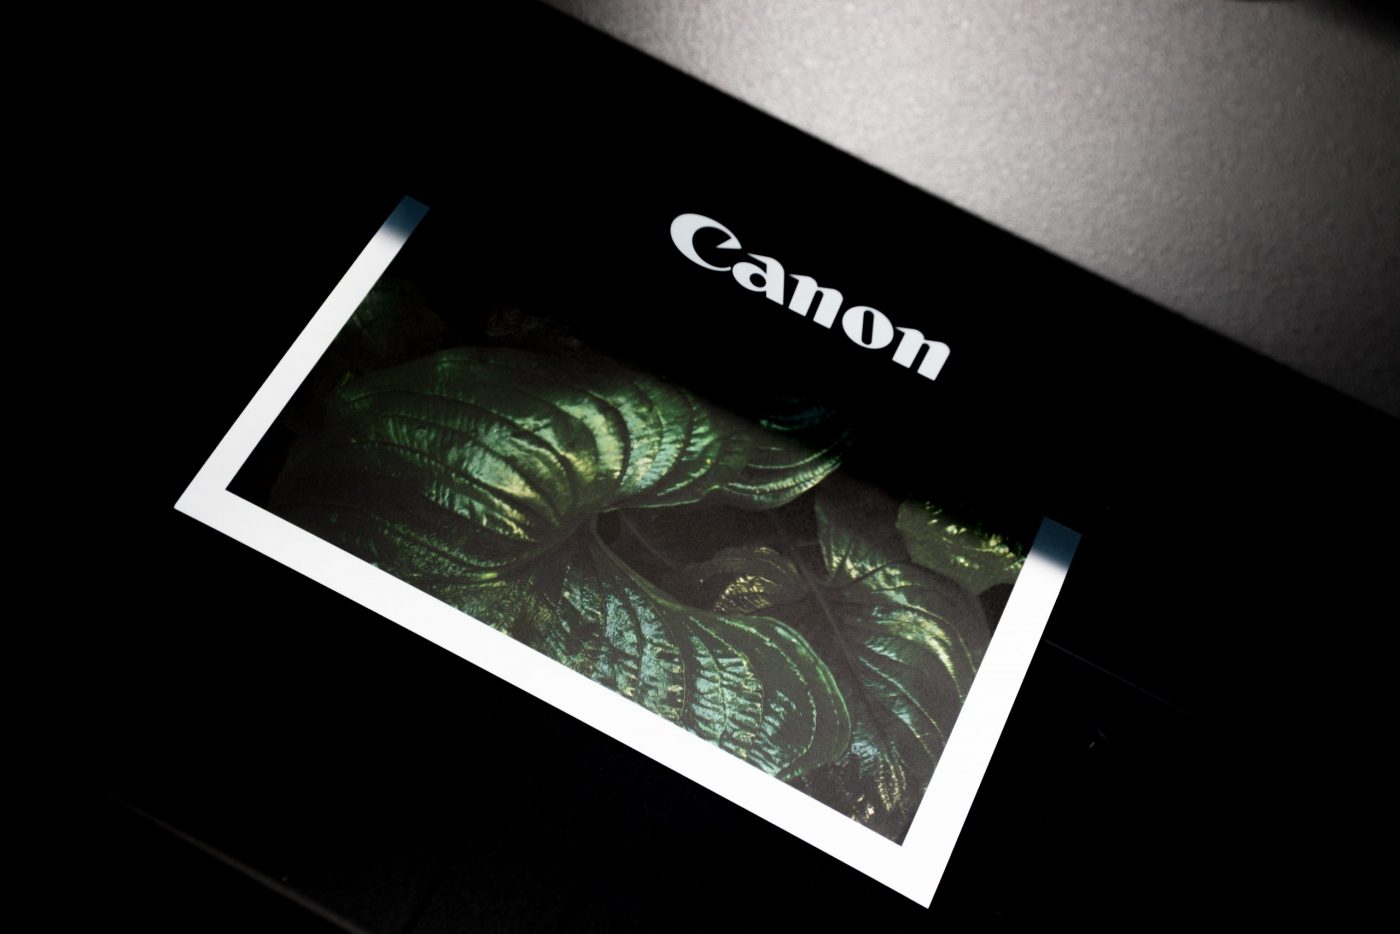 Canon increases revenue by 14% by adapting content discovery amid digital shift